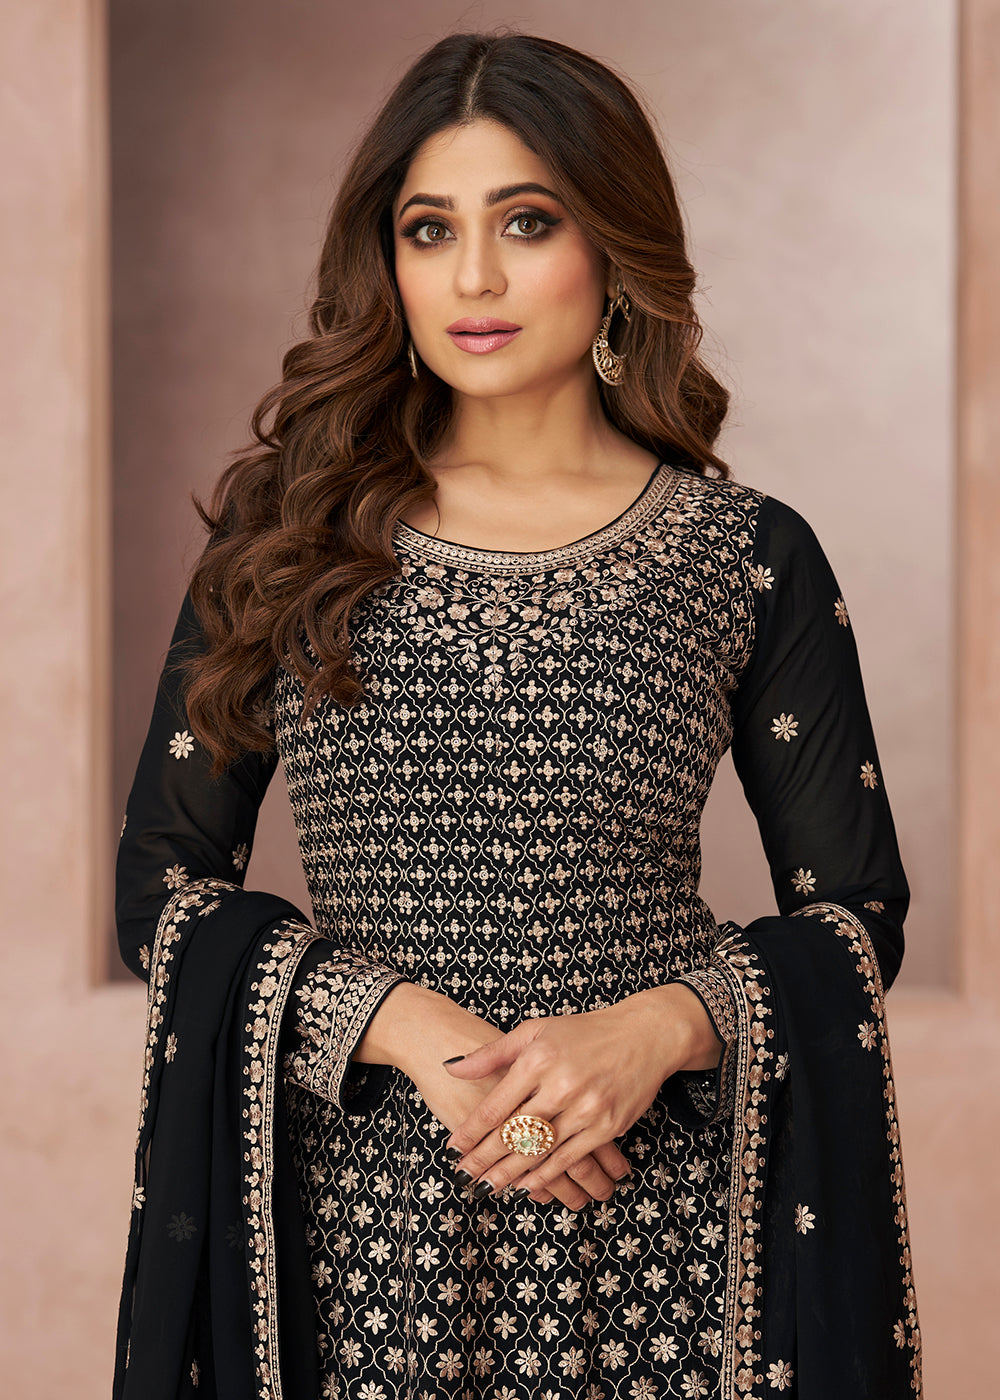 Buy Now Tempting Festive Look Black Georgette Palazzo Style Suit Online in USA, UK, Canada, Germany, Australia & Worldwide at Empress Clothing. 